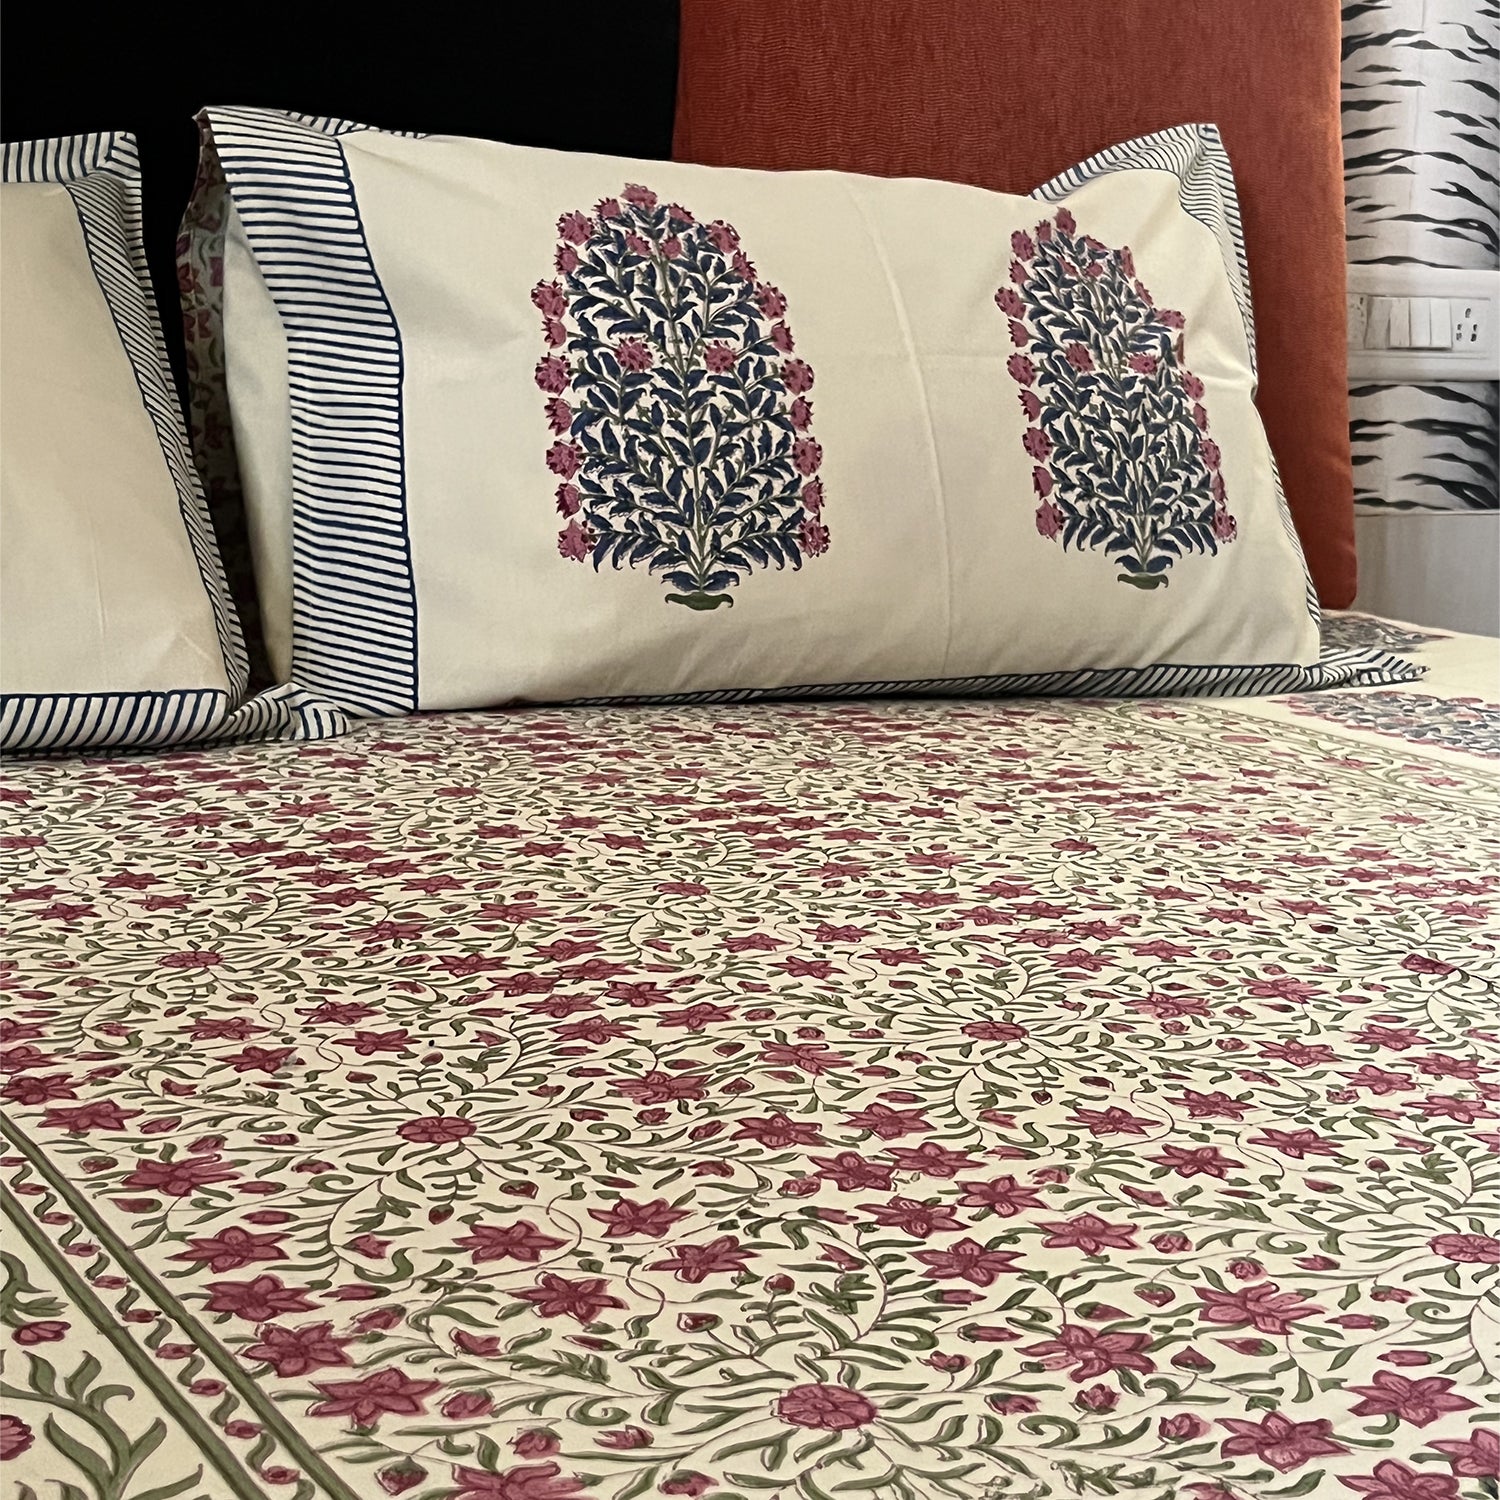 Blooming Bouquet White with Blue & Pink Motif Block Printed 100% Cotton Bedsheet With 2 Pillow Covers